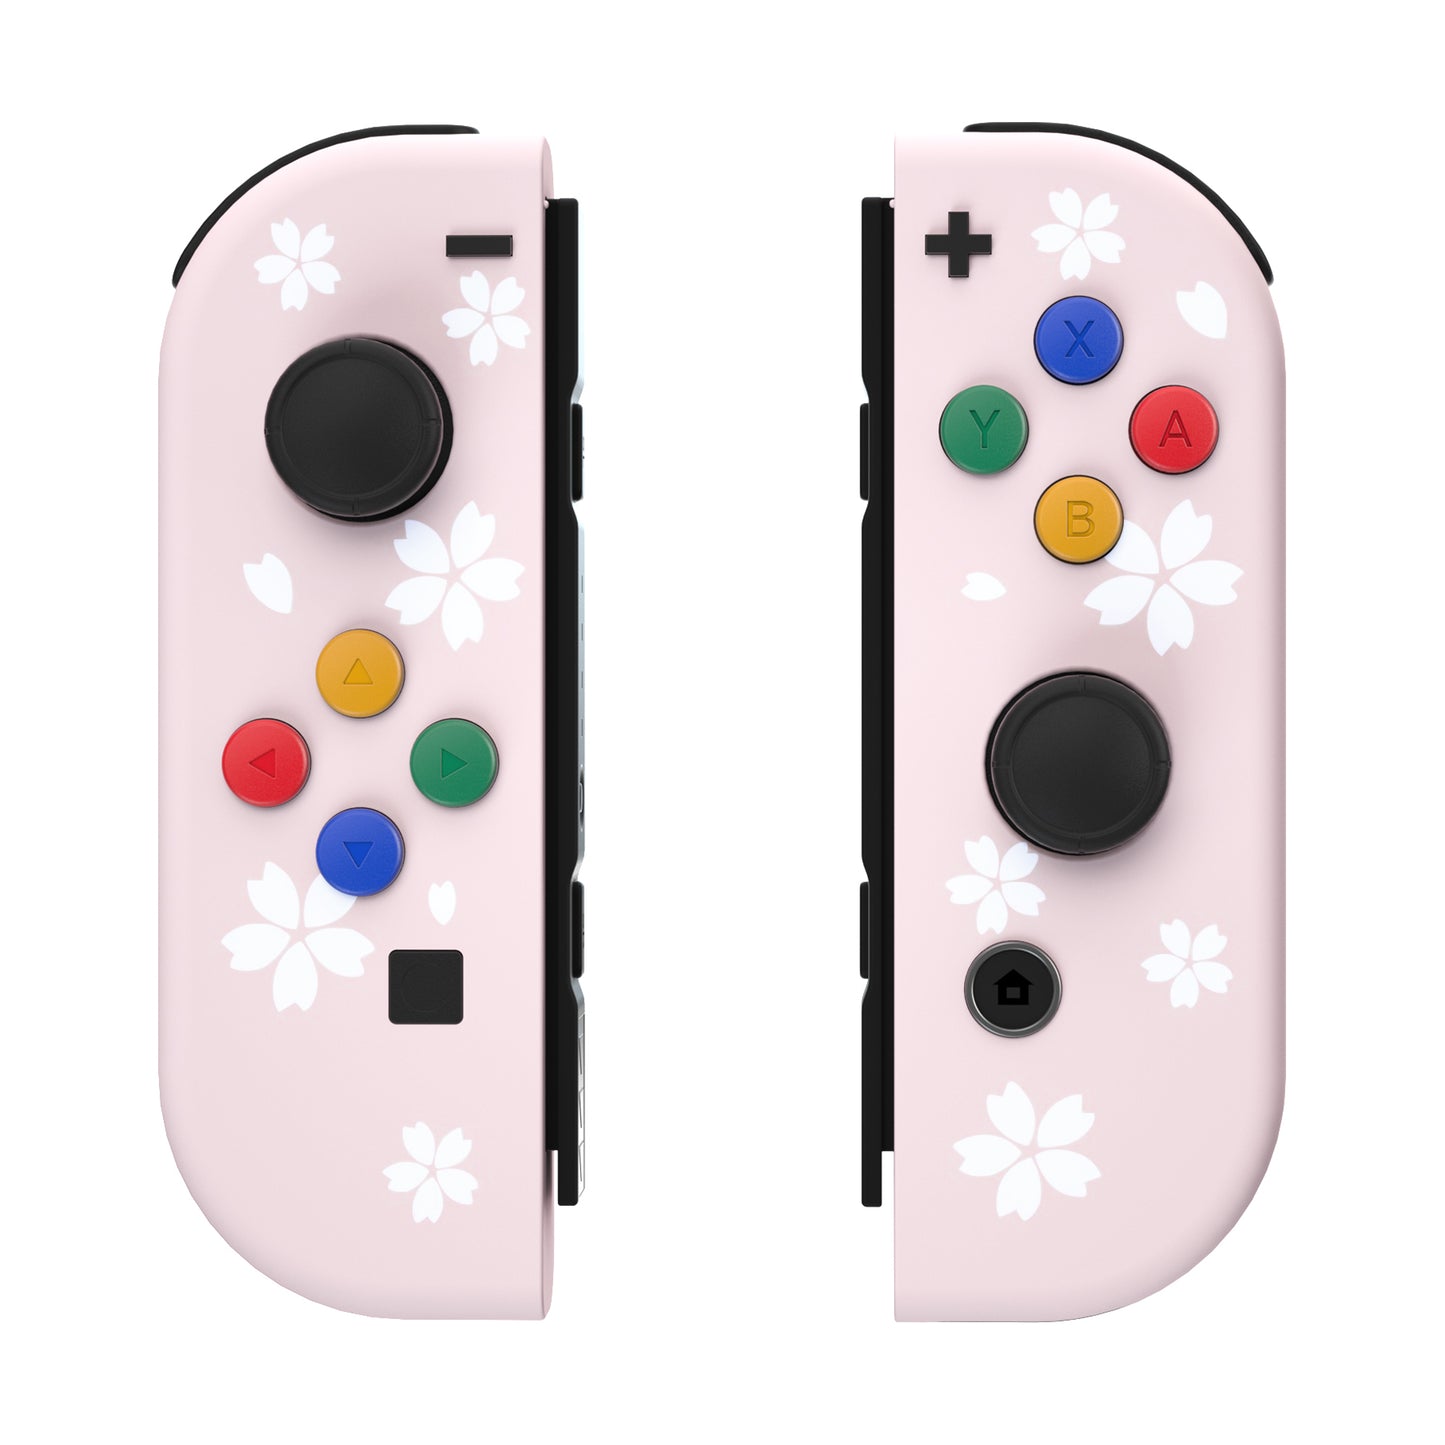 eXtremeRate Replacement Full Set Shell Case with Buttons for Joycon of NS Switch - Cherry Blossoms Petals Patterned eXtremeRate